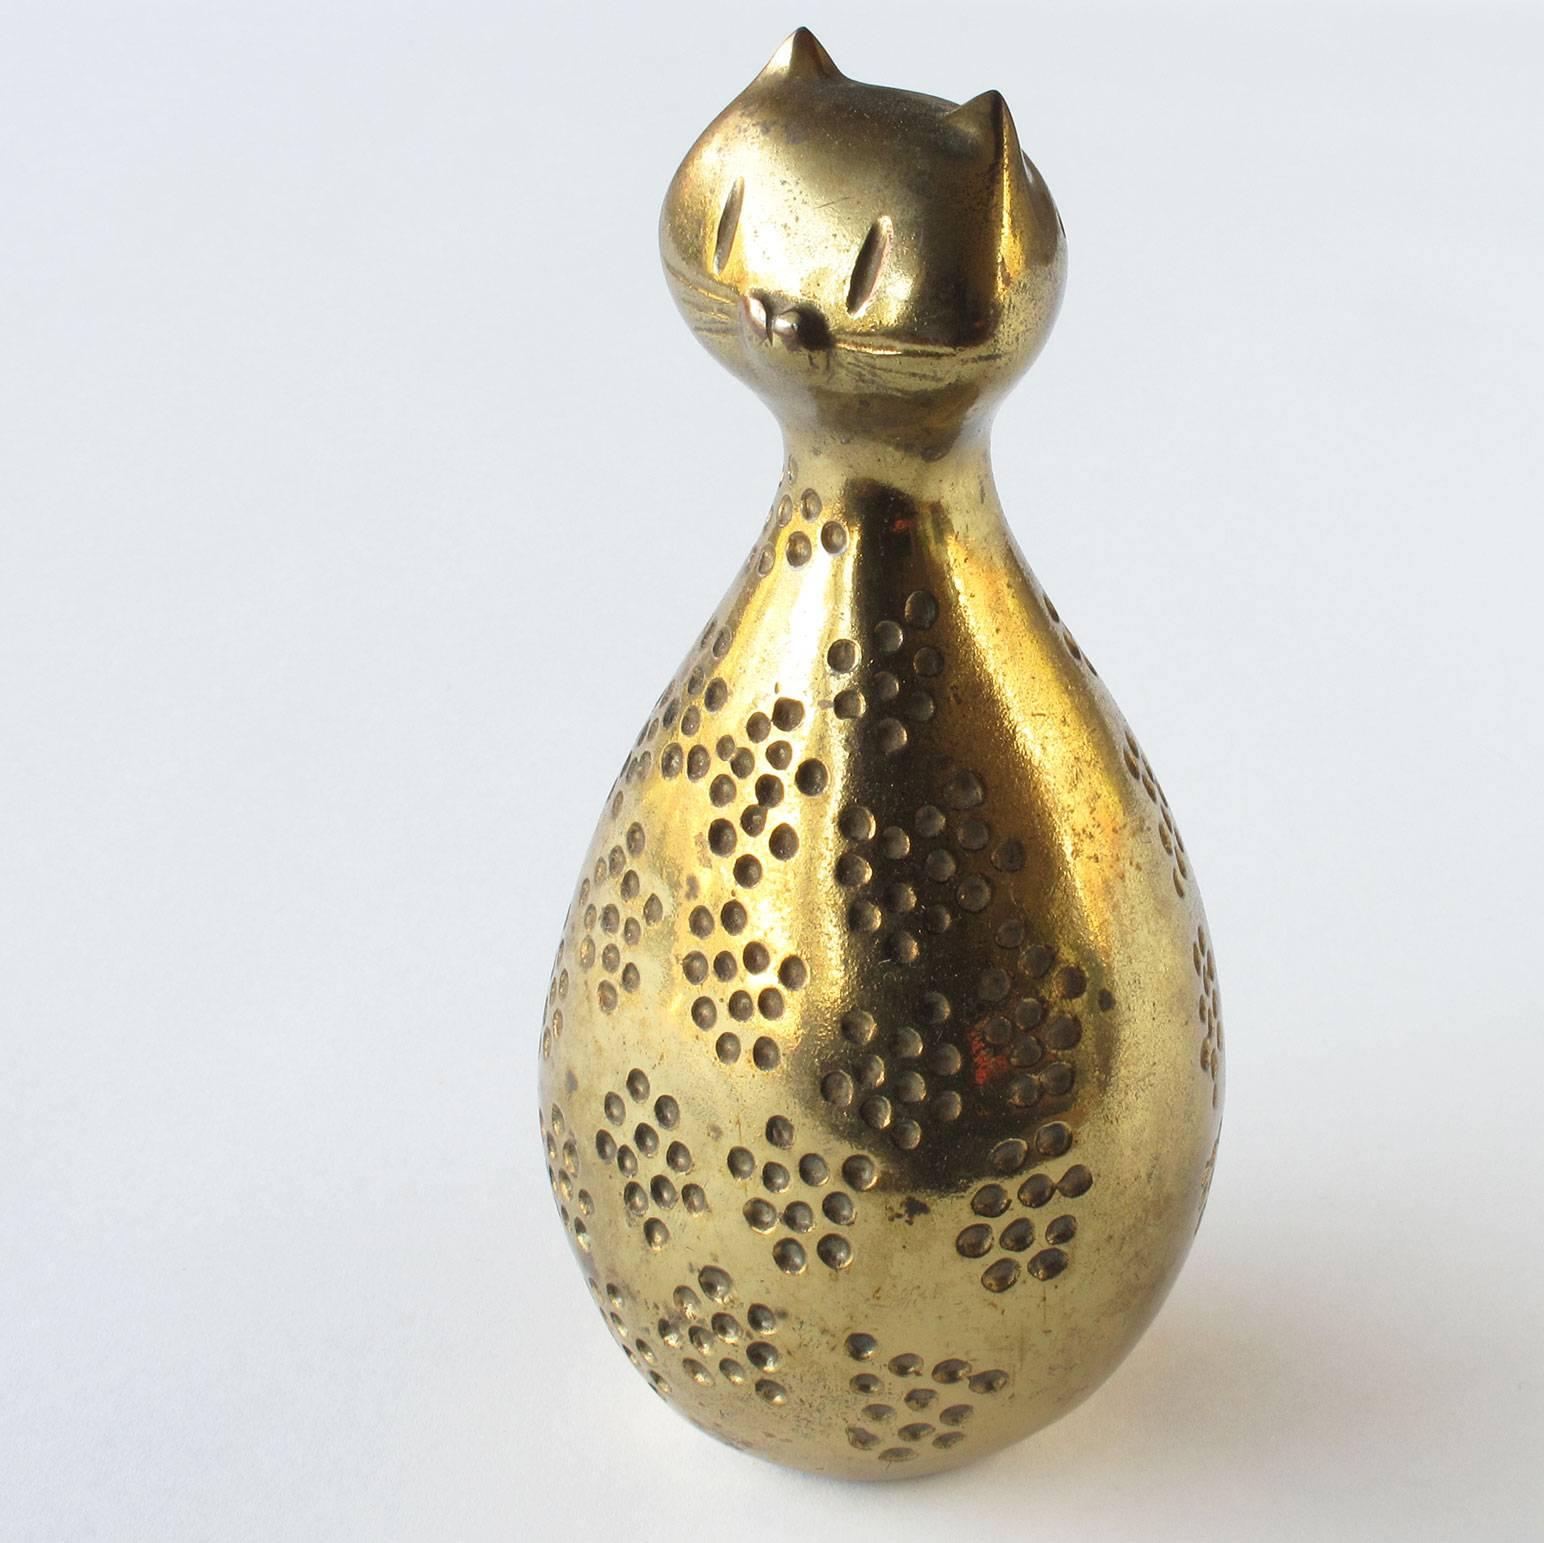 Ben Seibel coin bank, brass-plated cast metal with rubber stop, 1950s. Measures: 6.75 high x 3.25 wide x 3 deep inches, Jenfred Ware, New York.